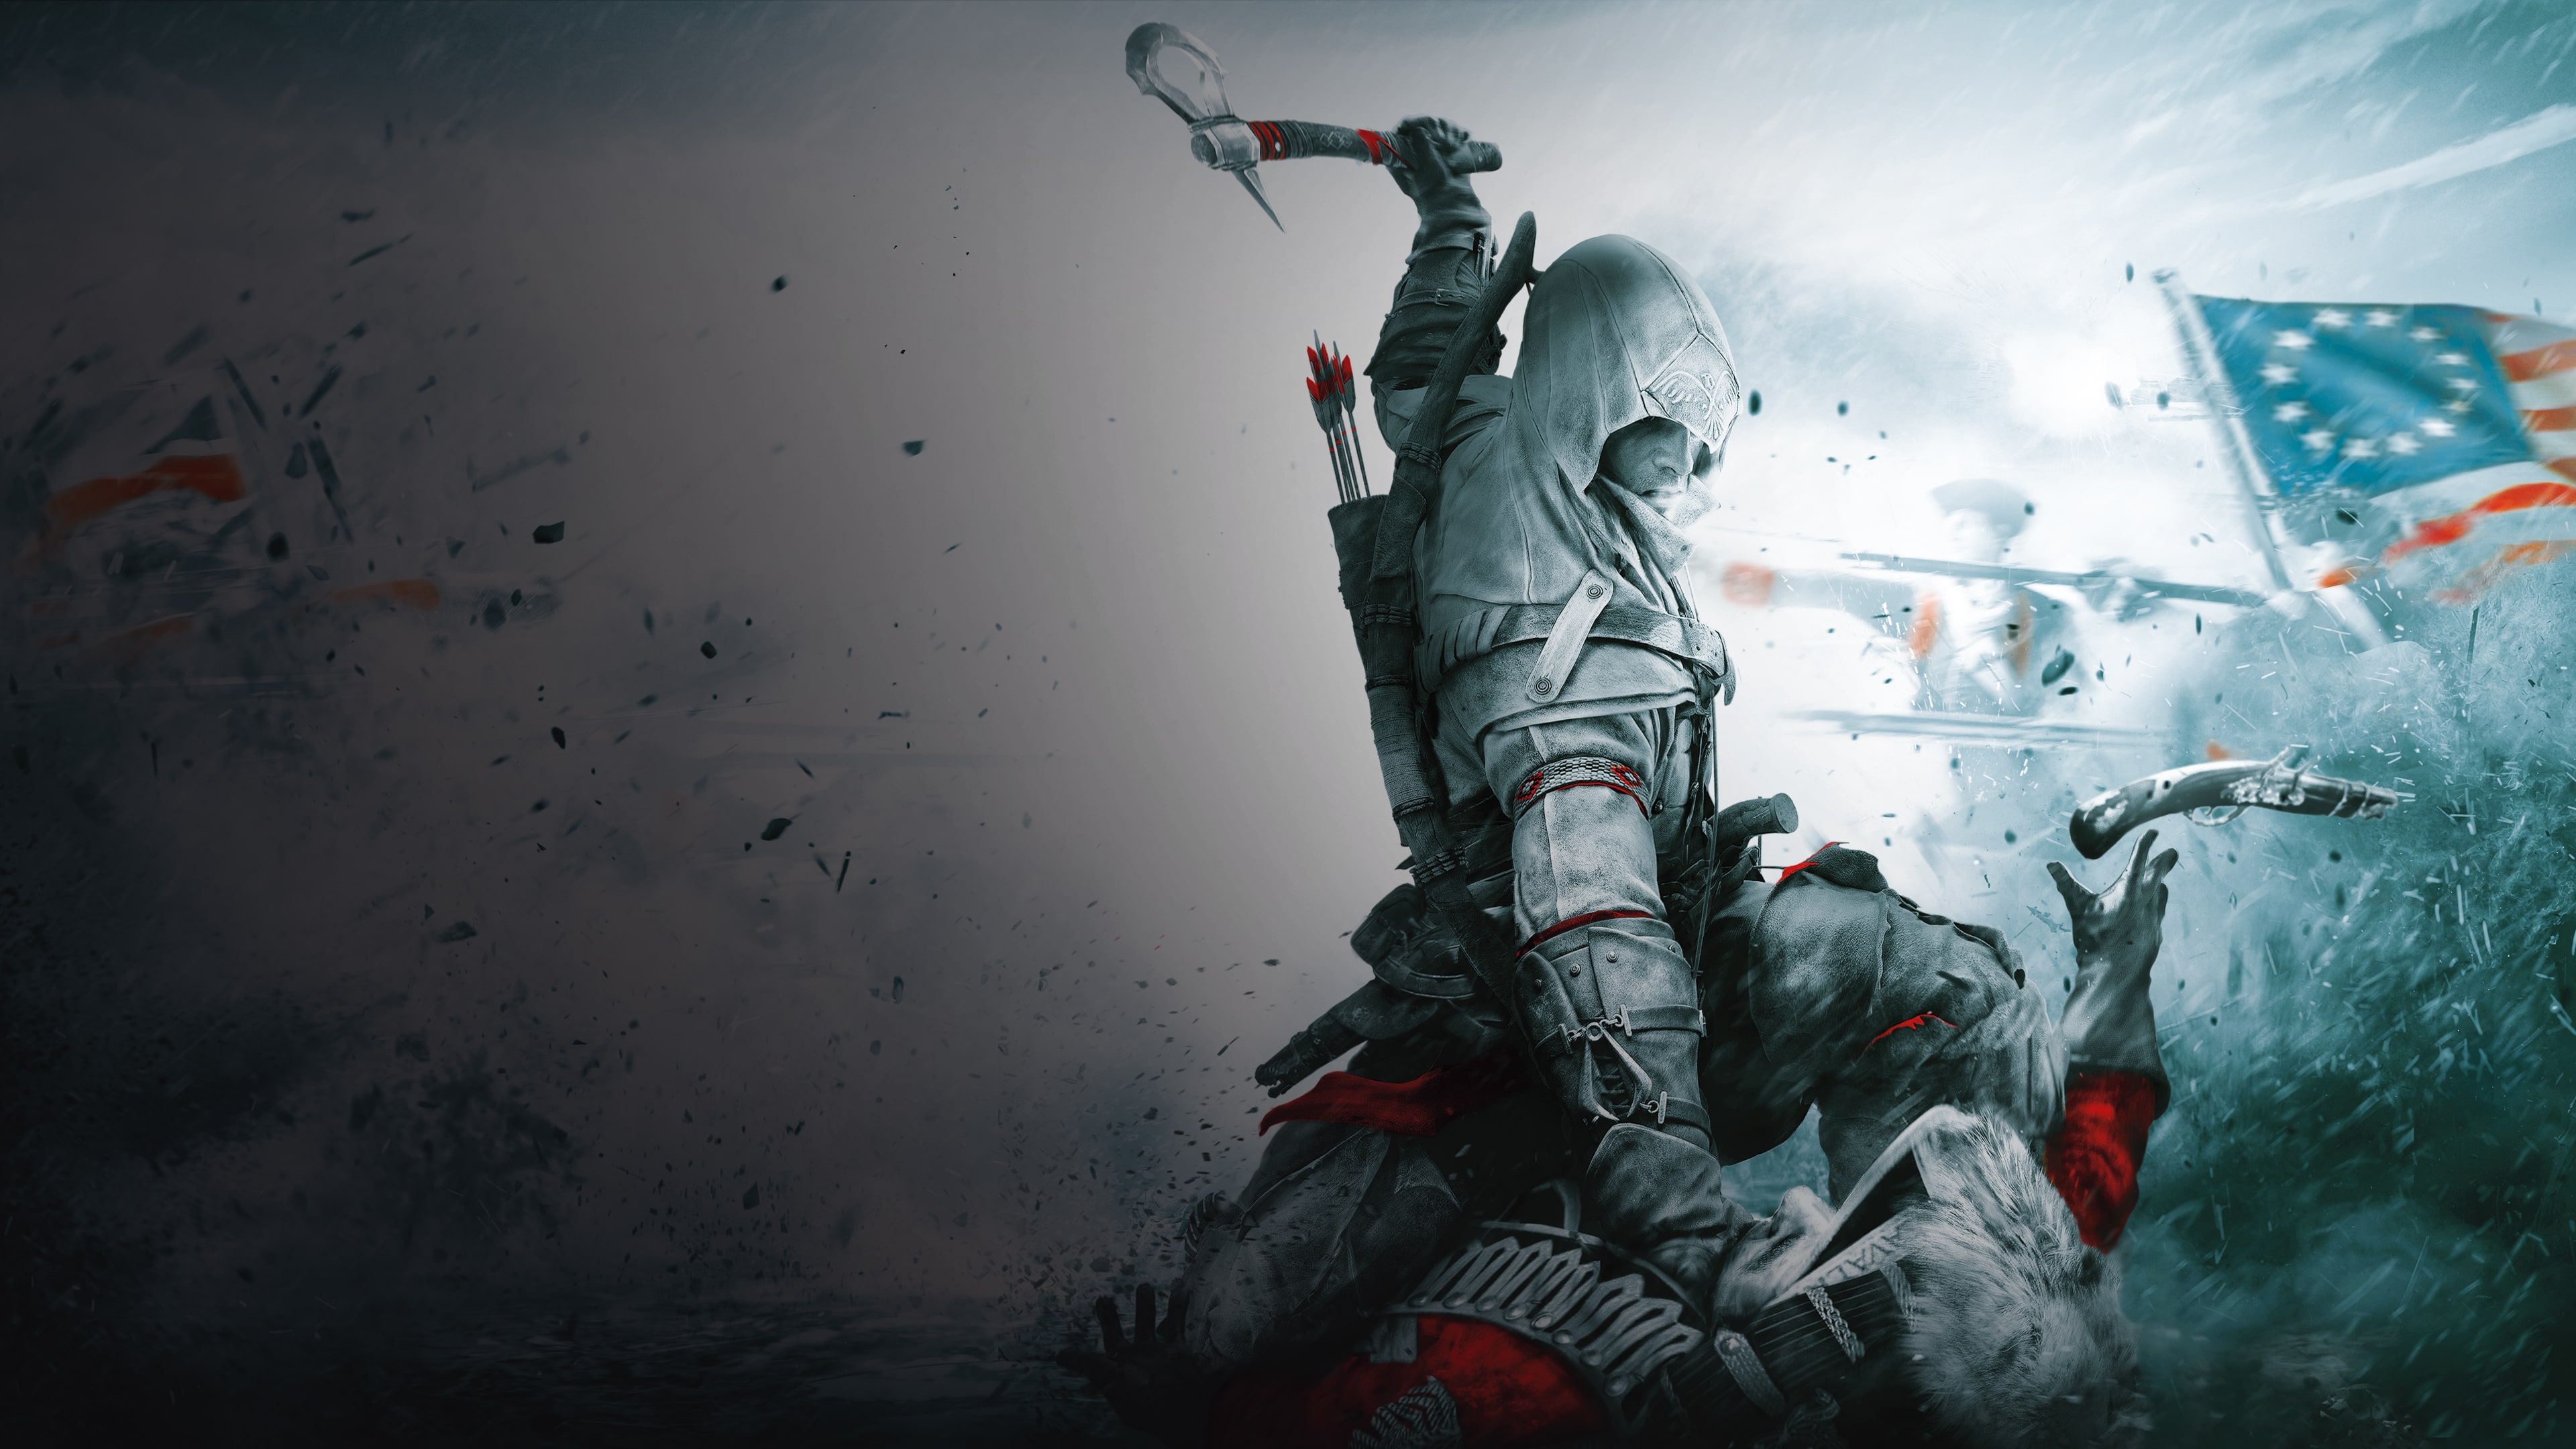 Assassin's Creed III: Remastered - PlayStation 4